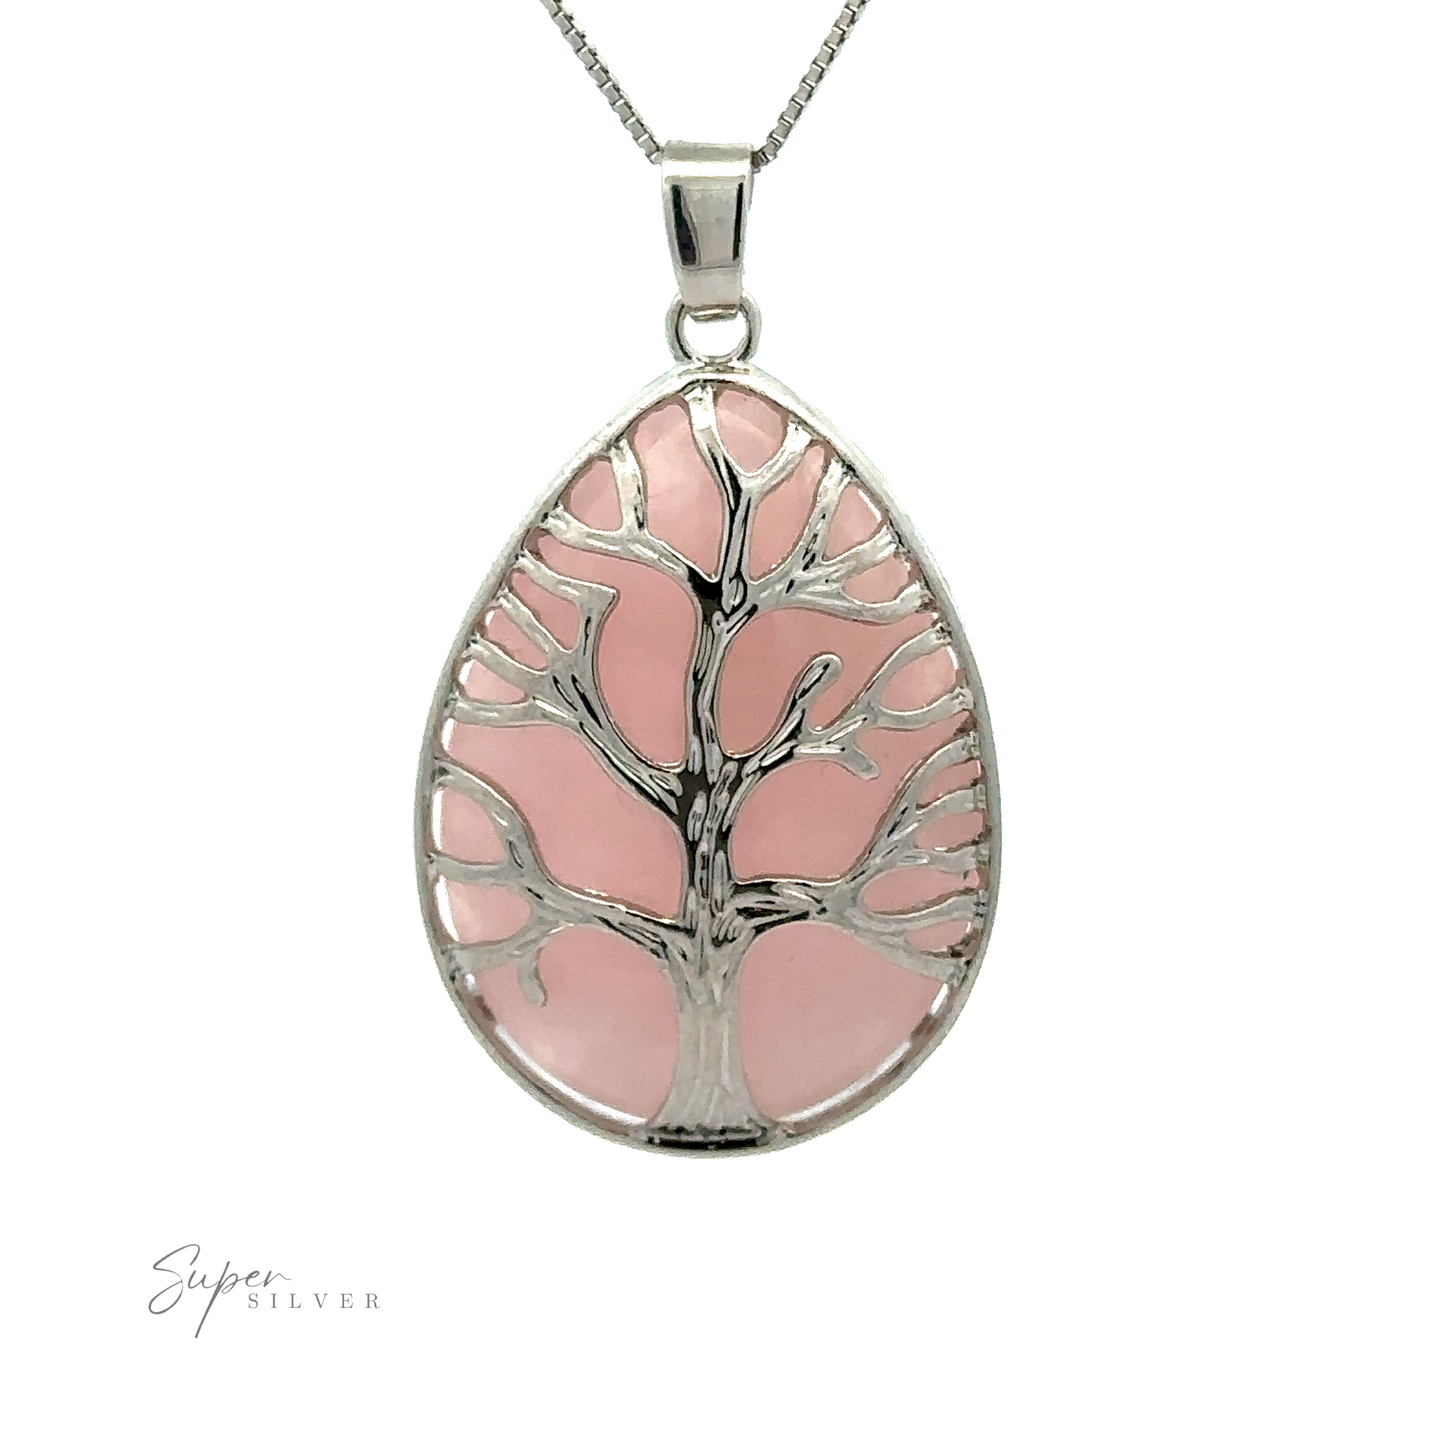 
                  
                    A silver necklace features a Teardrop Shape Stone with Silver Plated Tree Of Life Pendant design over a teardrop-shaped Rose Quartz pendant, displayed against a white background. The logo "Super Silver" is visible in the bottom left corner.
                  
                